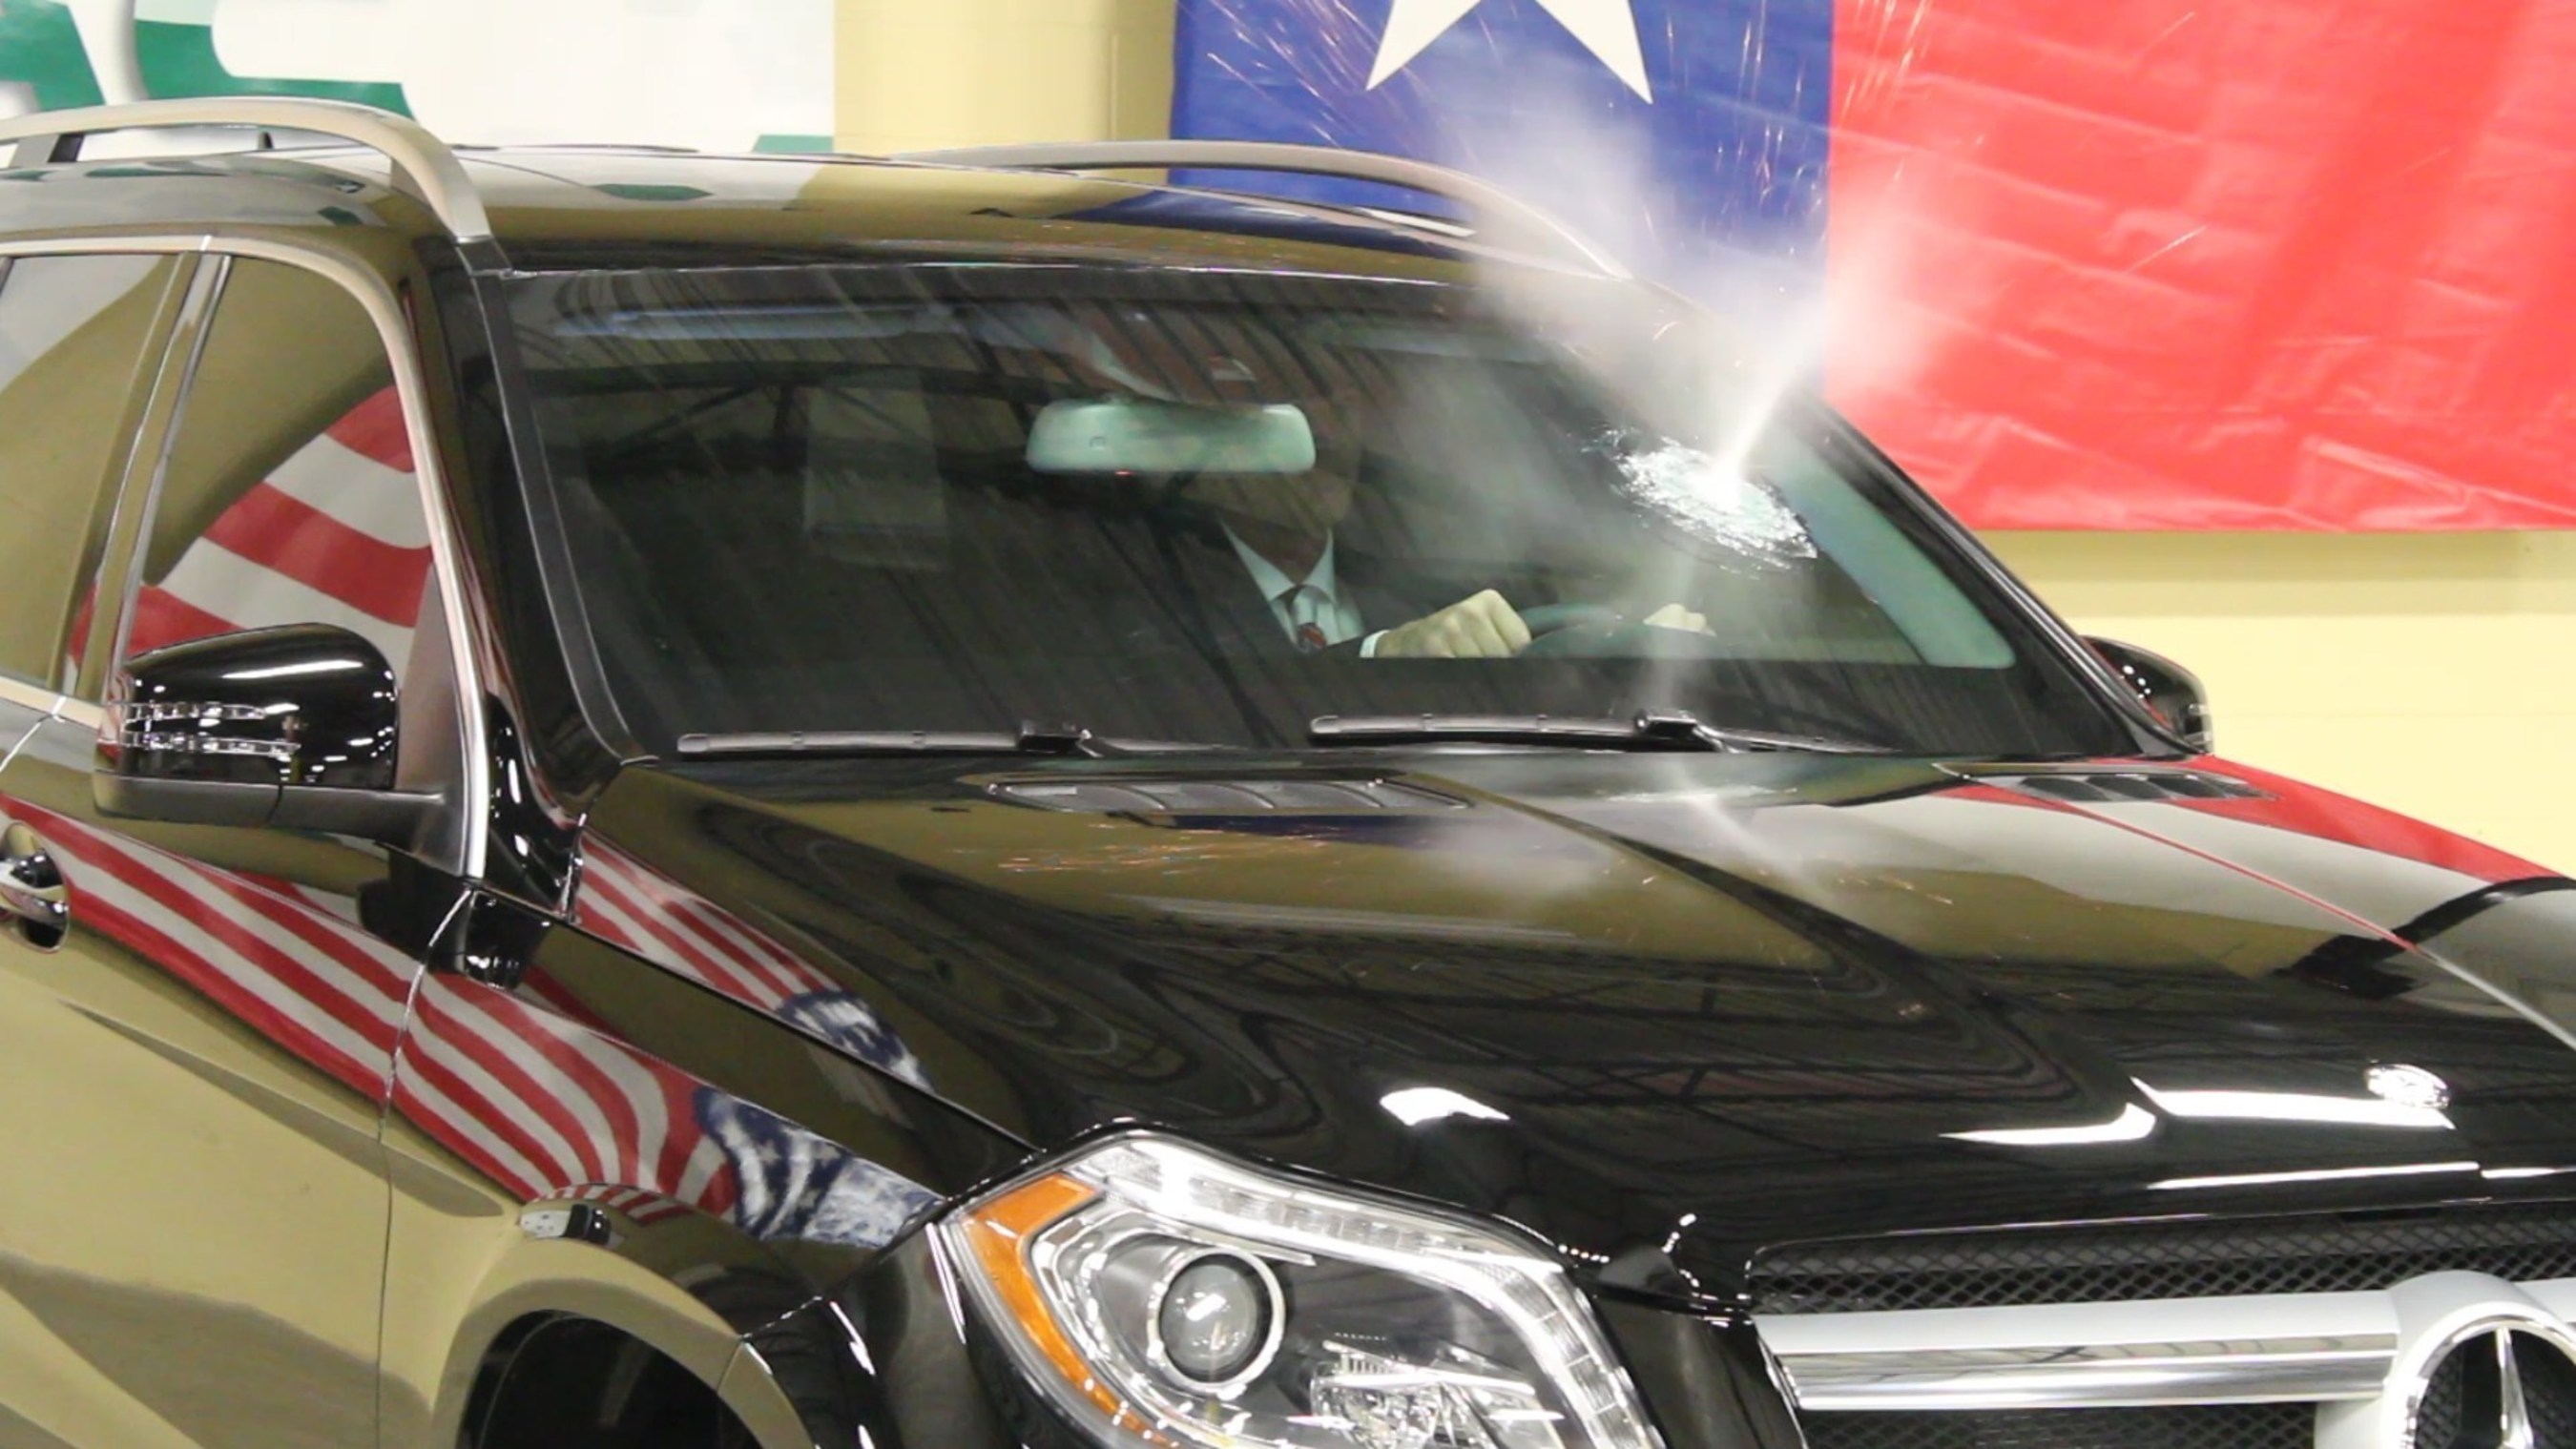 The first bullet fired from an AK-47 strikes the windshield of an armored Mercedes-Benz SUV just inches from Texas Armoring President/CEO Trent Kimball's face.